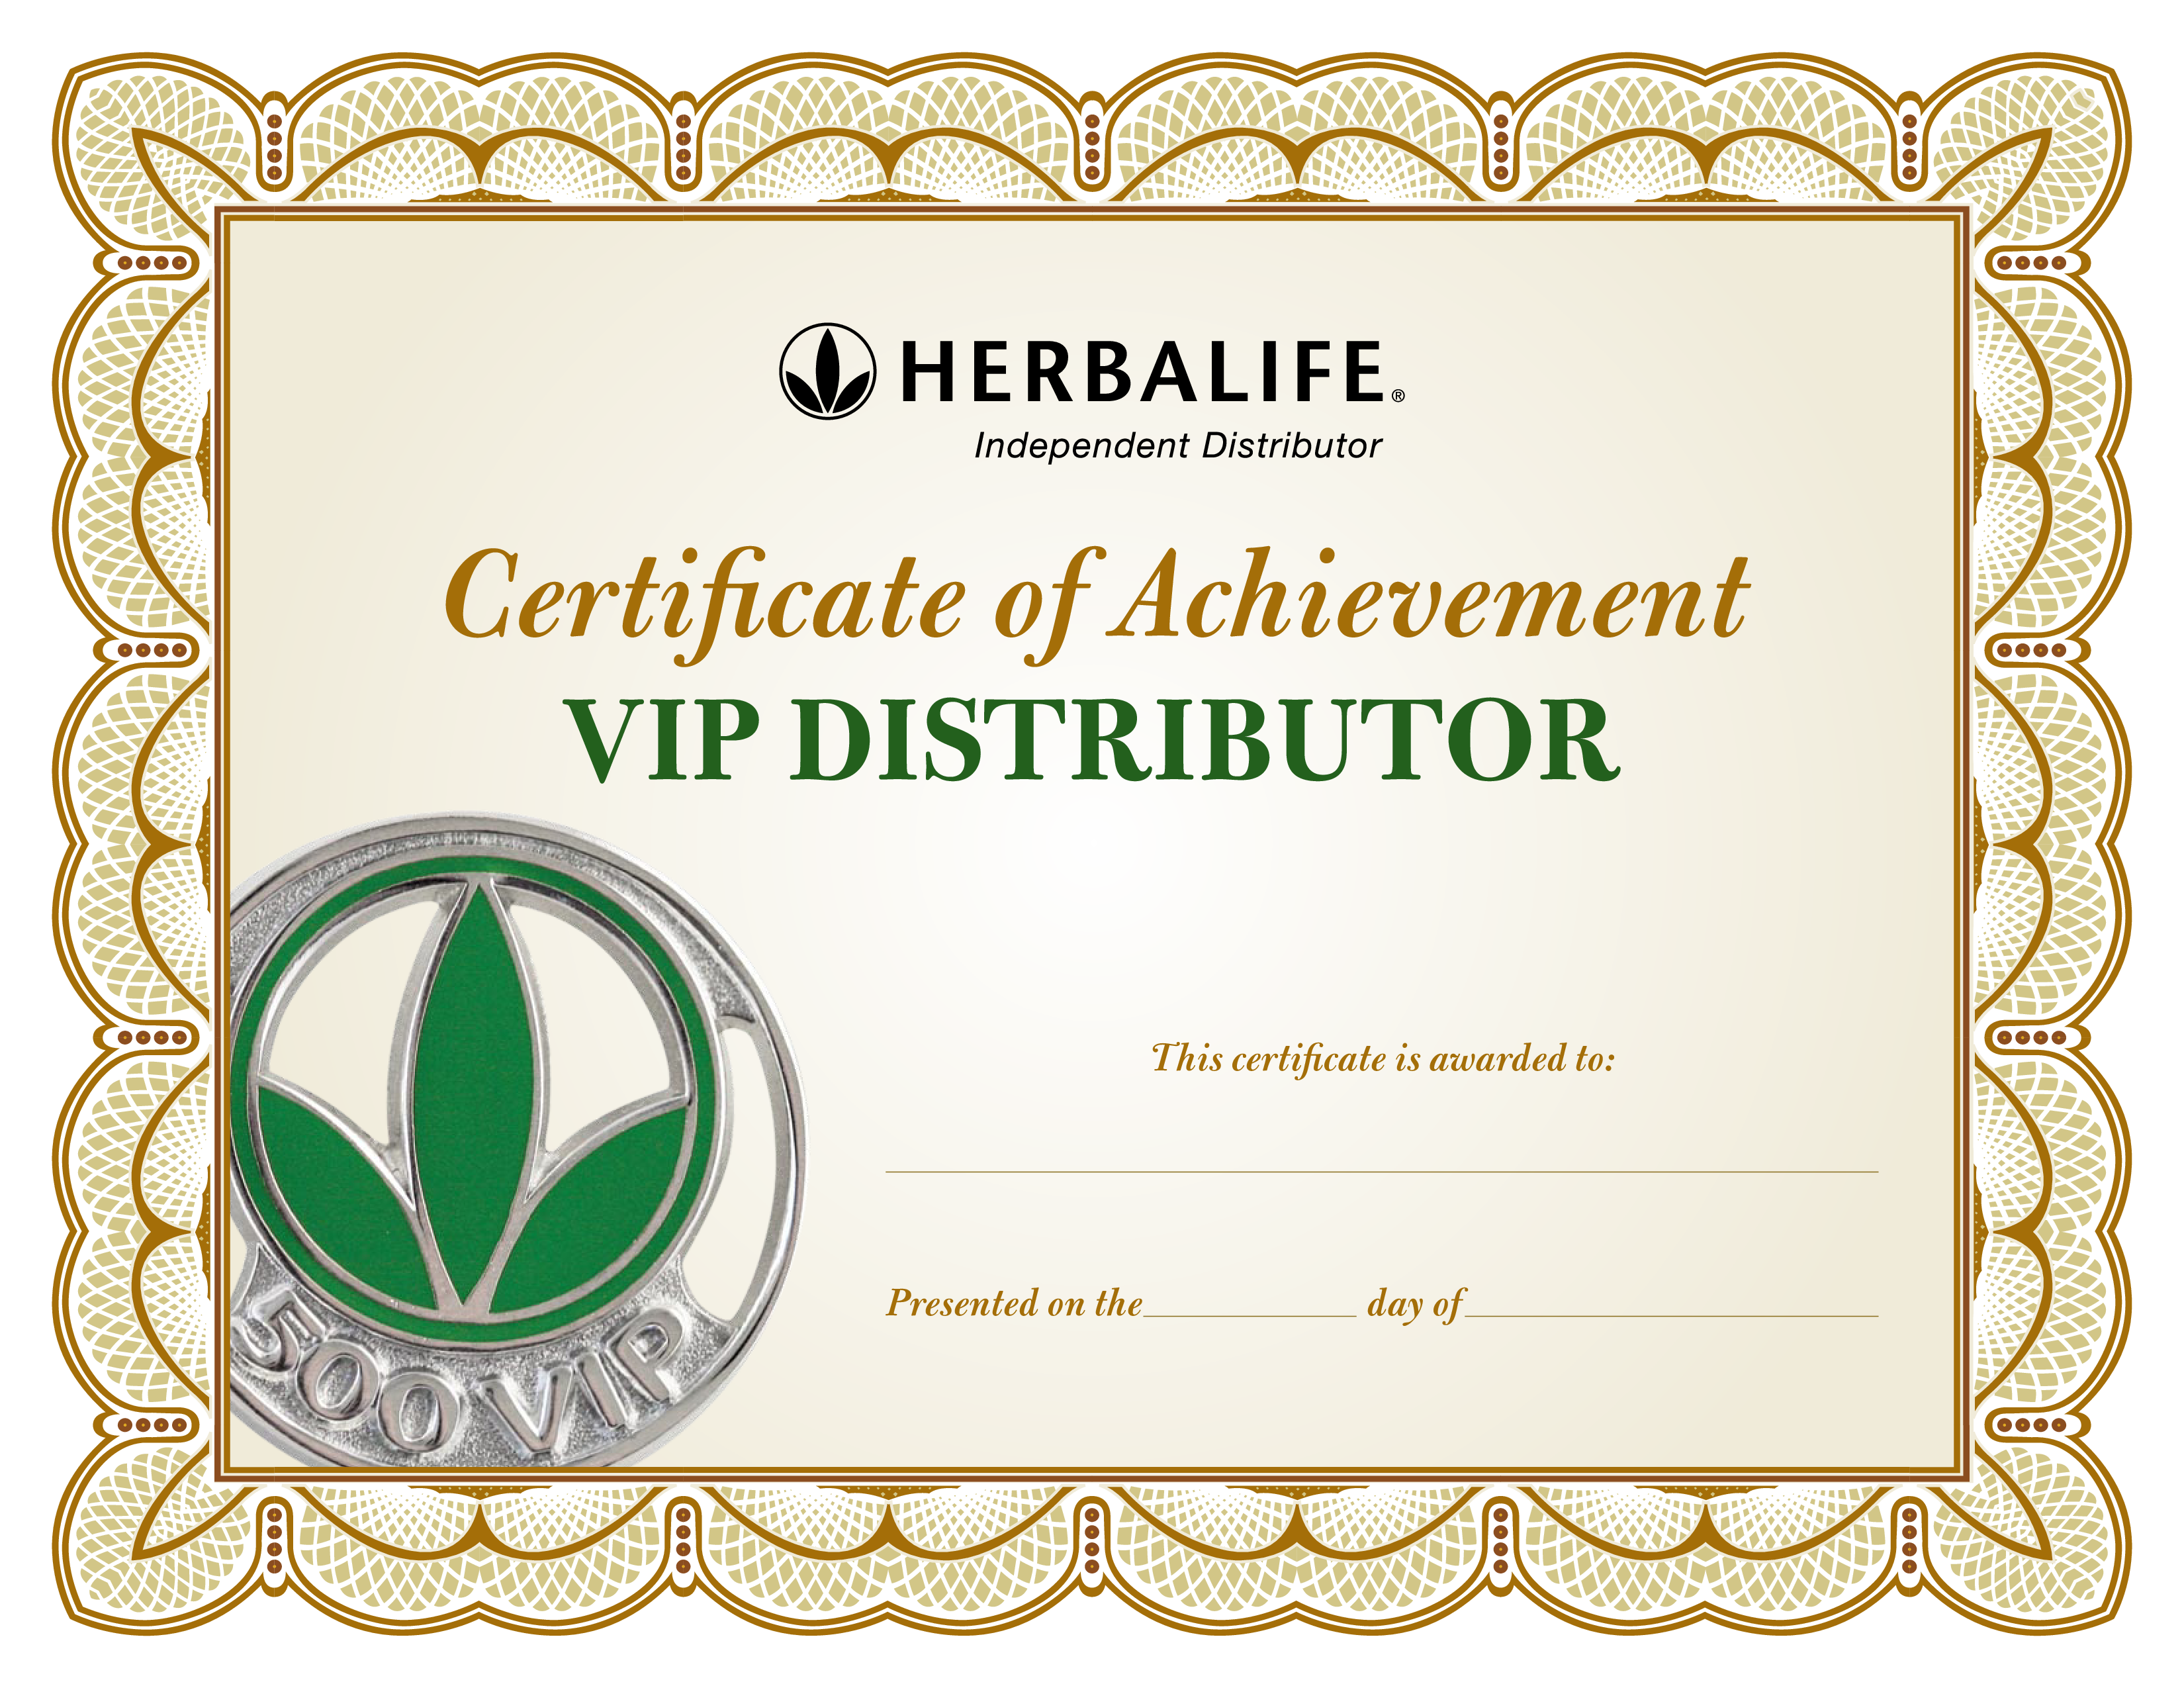 Distributor Certificate Of Achievement  How to create a